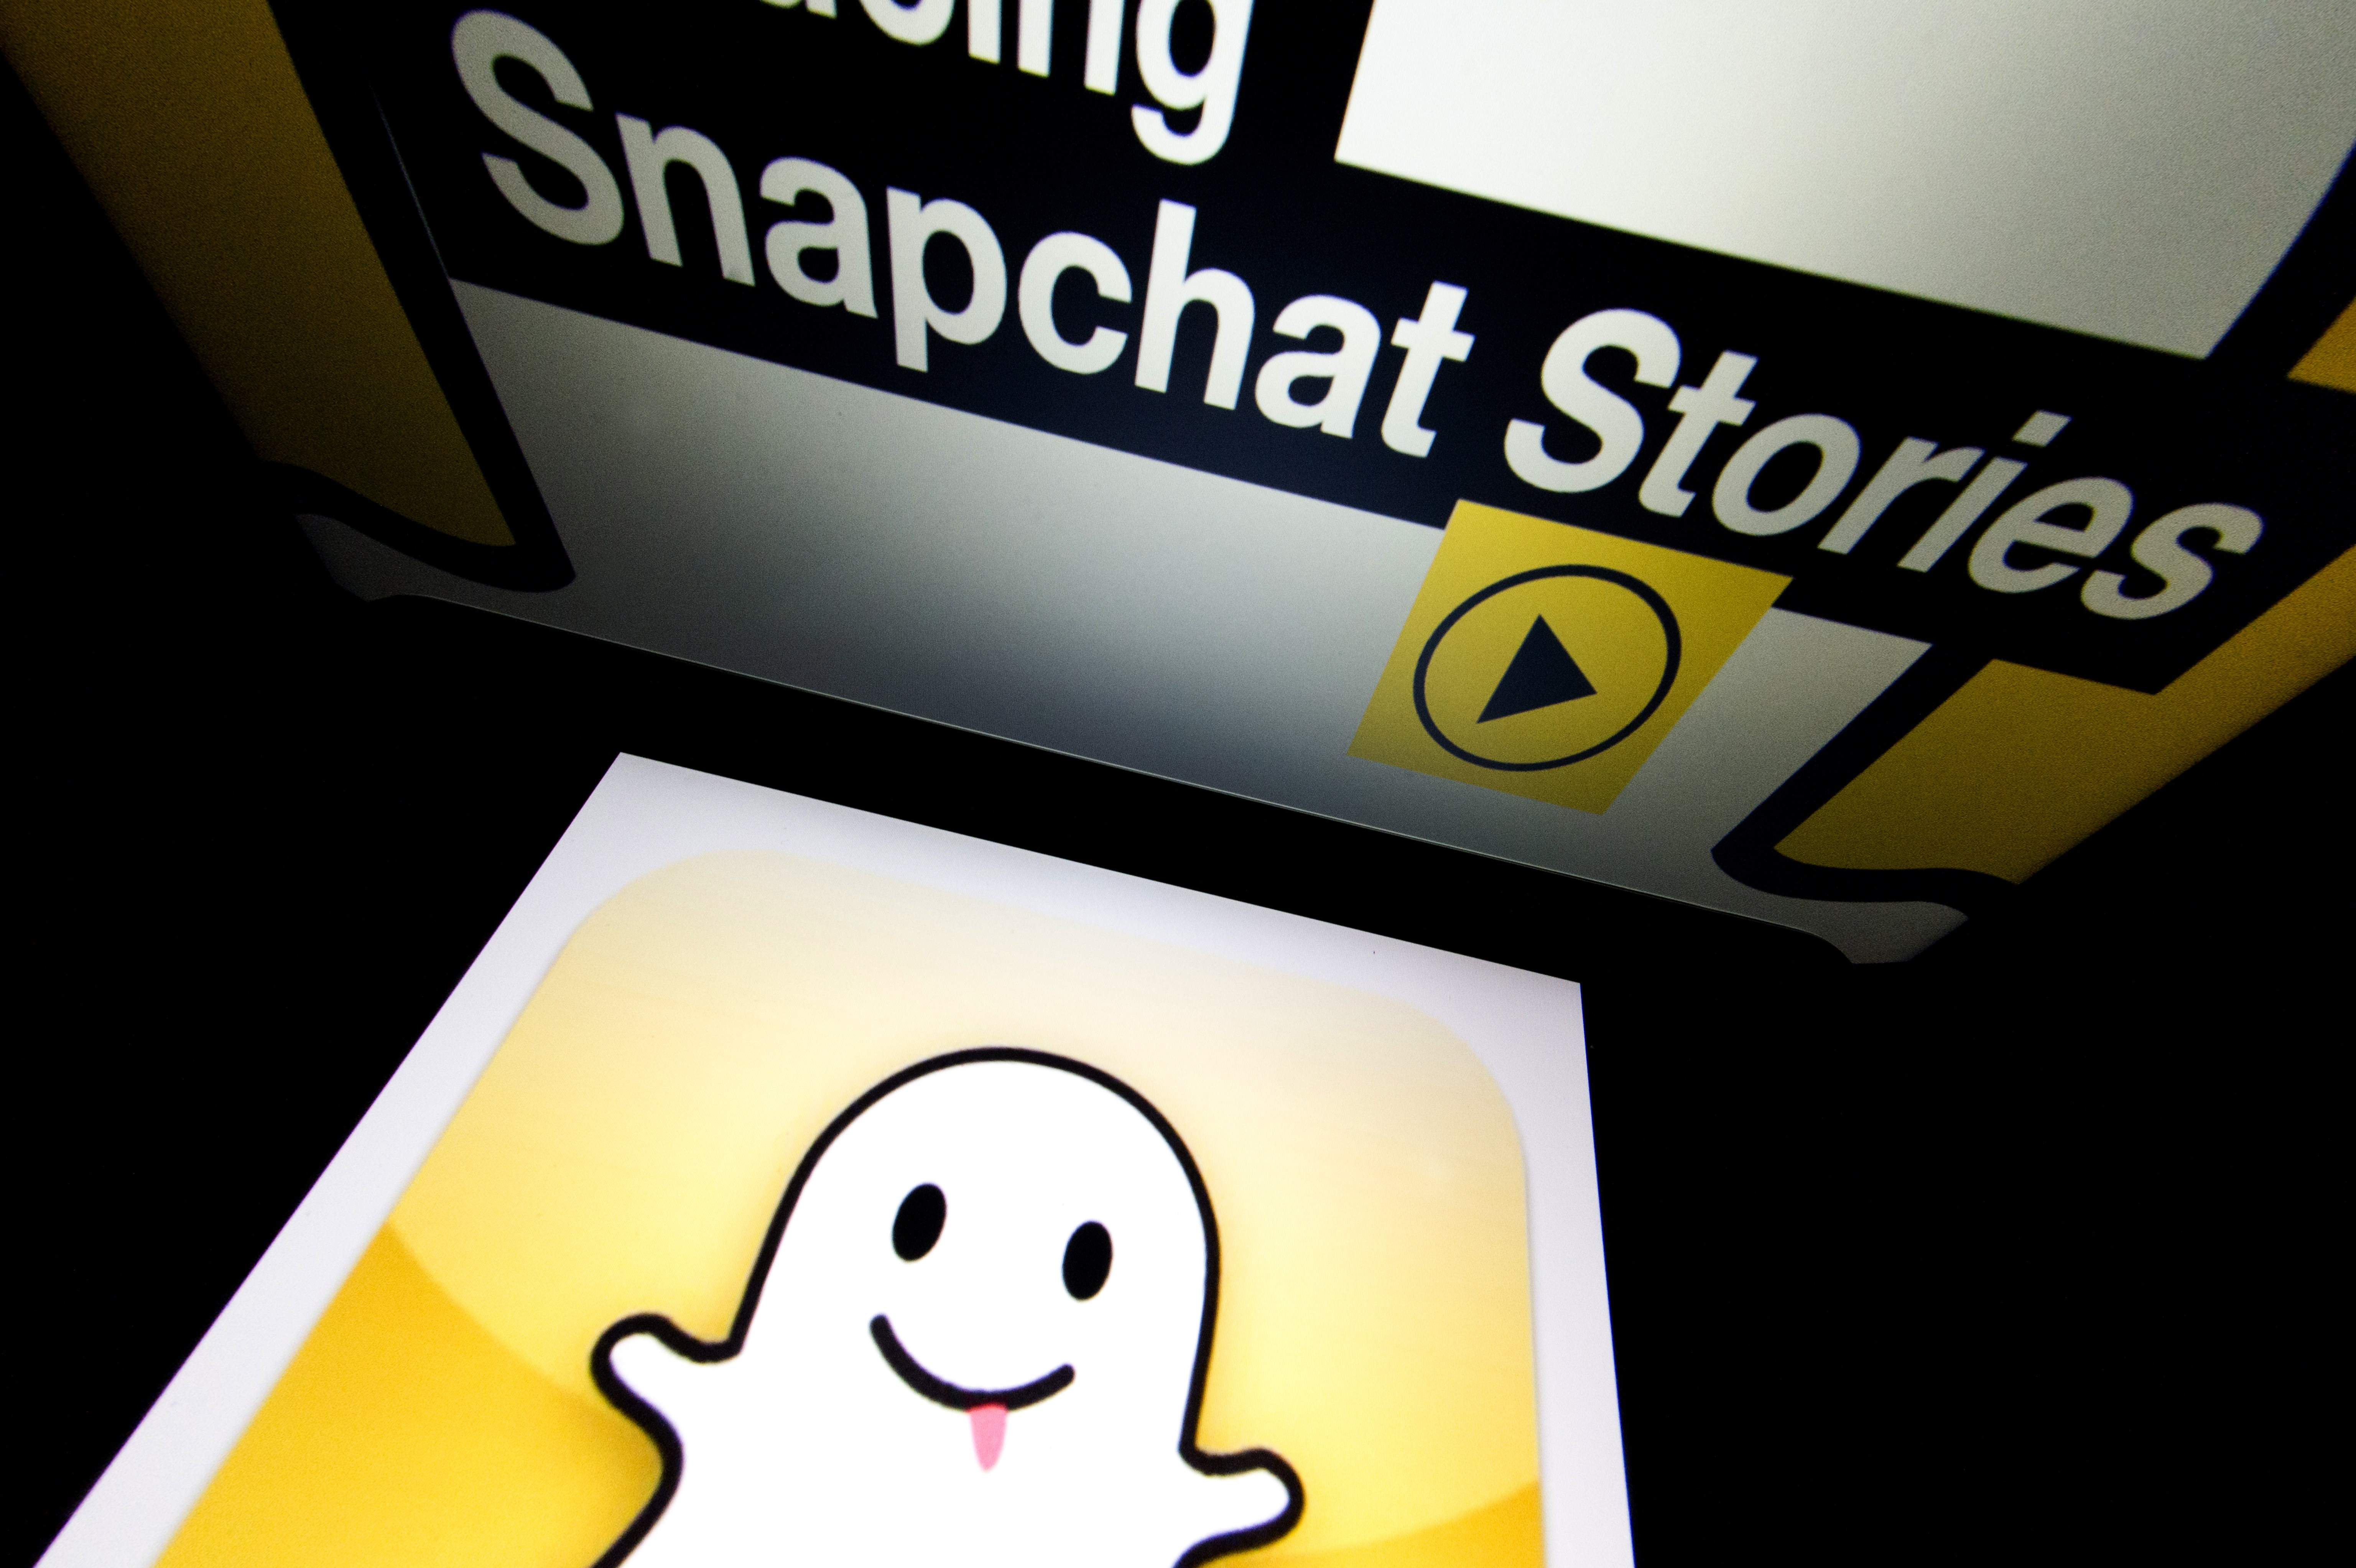 The Snapchat logo on a tablet